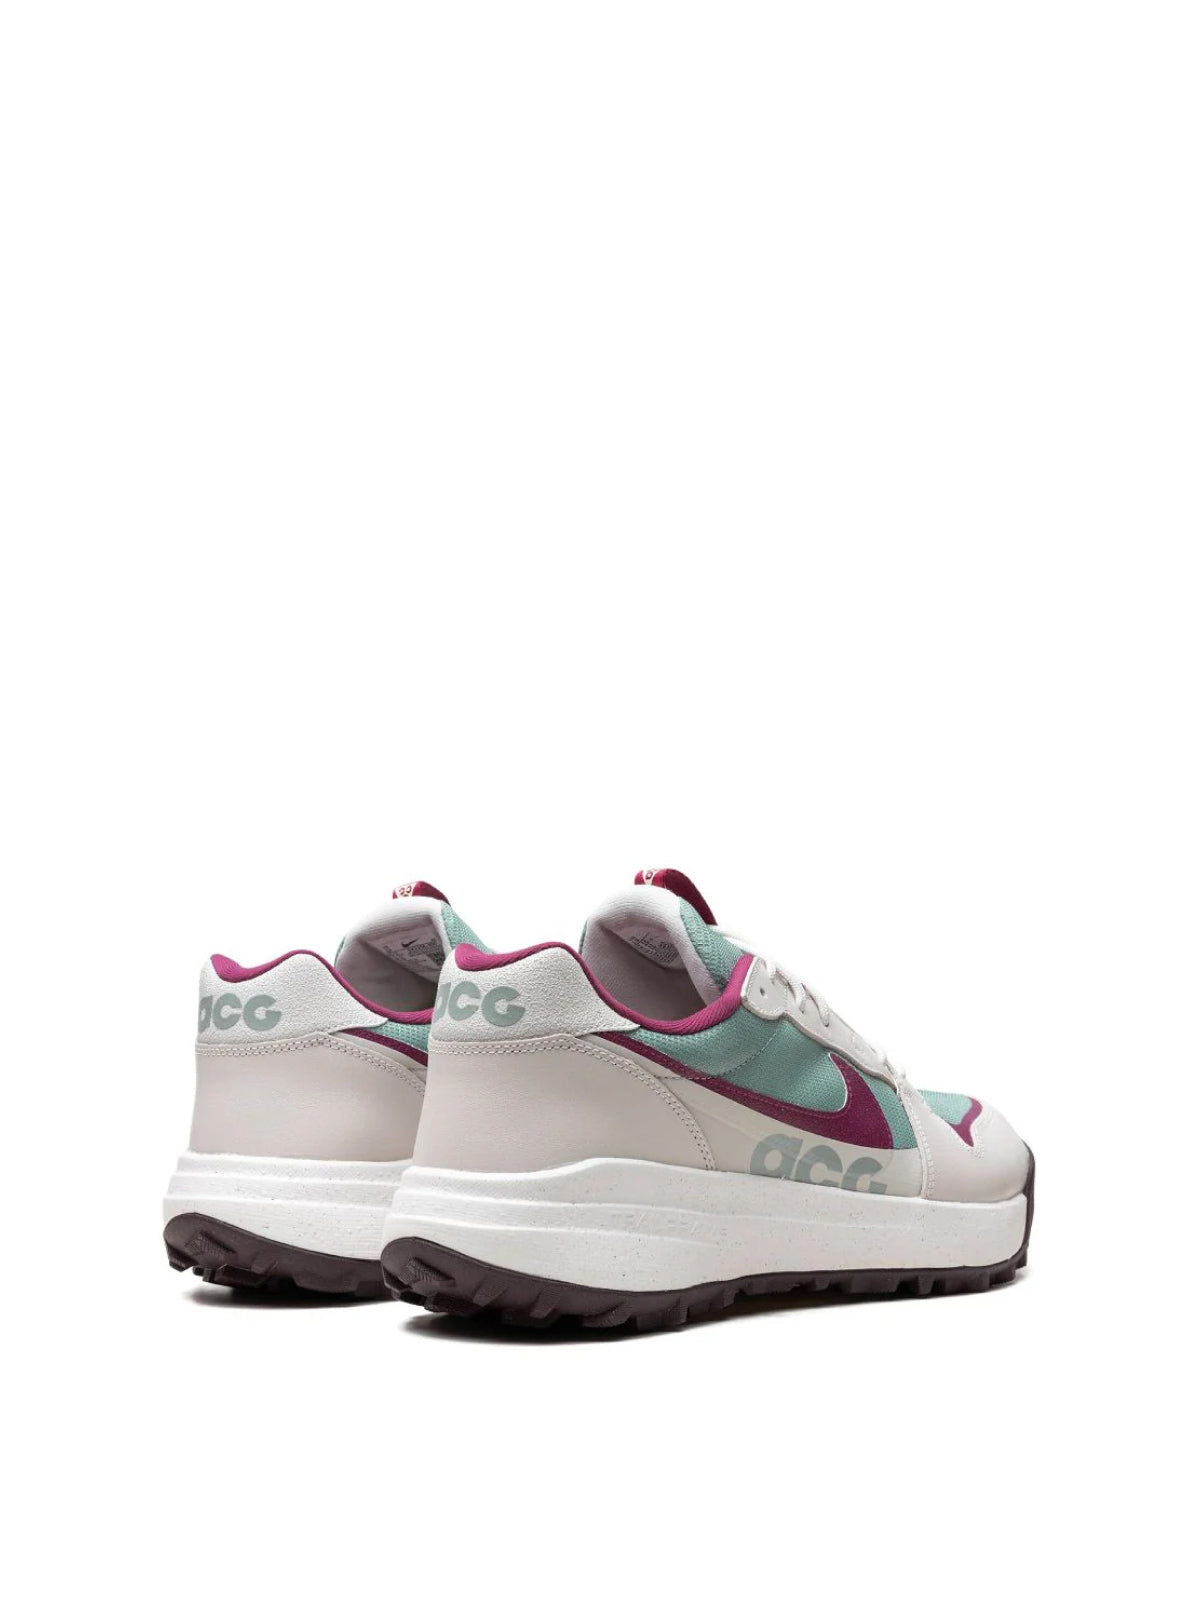 Nike-OUTLET-SALE-ACG Lowcate Sneakers-ARCHIVIST